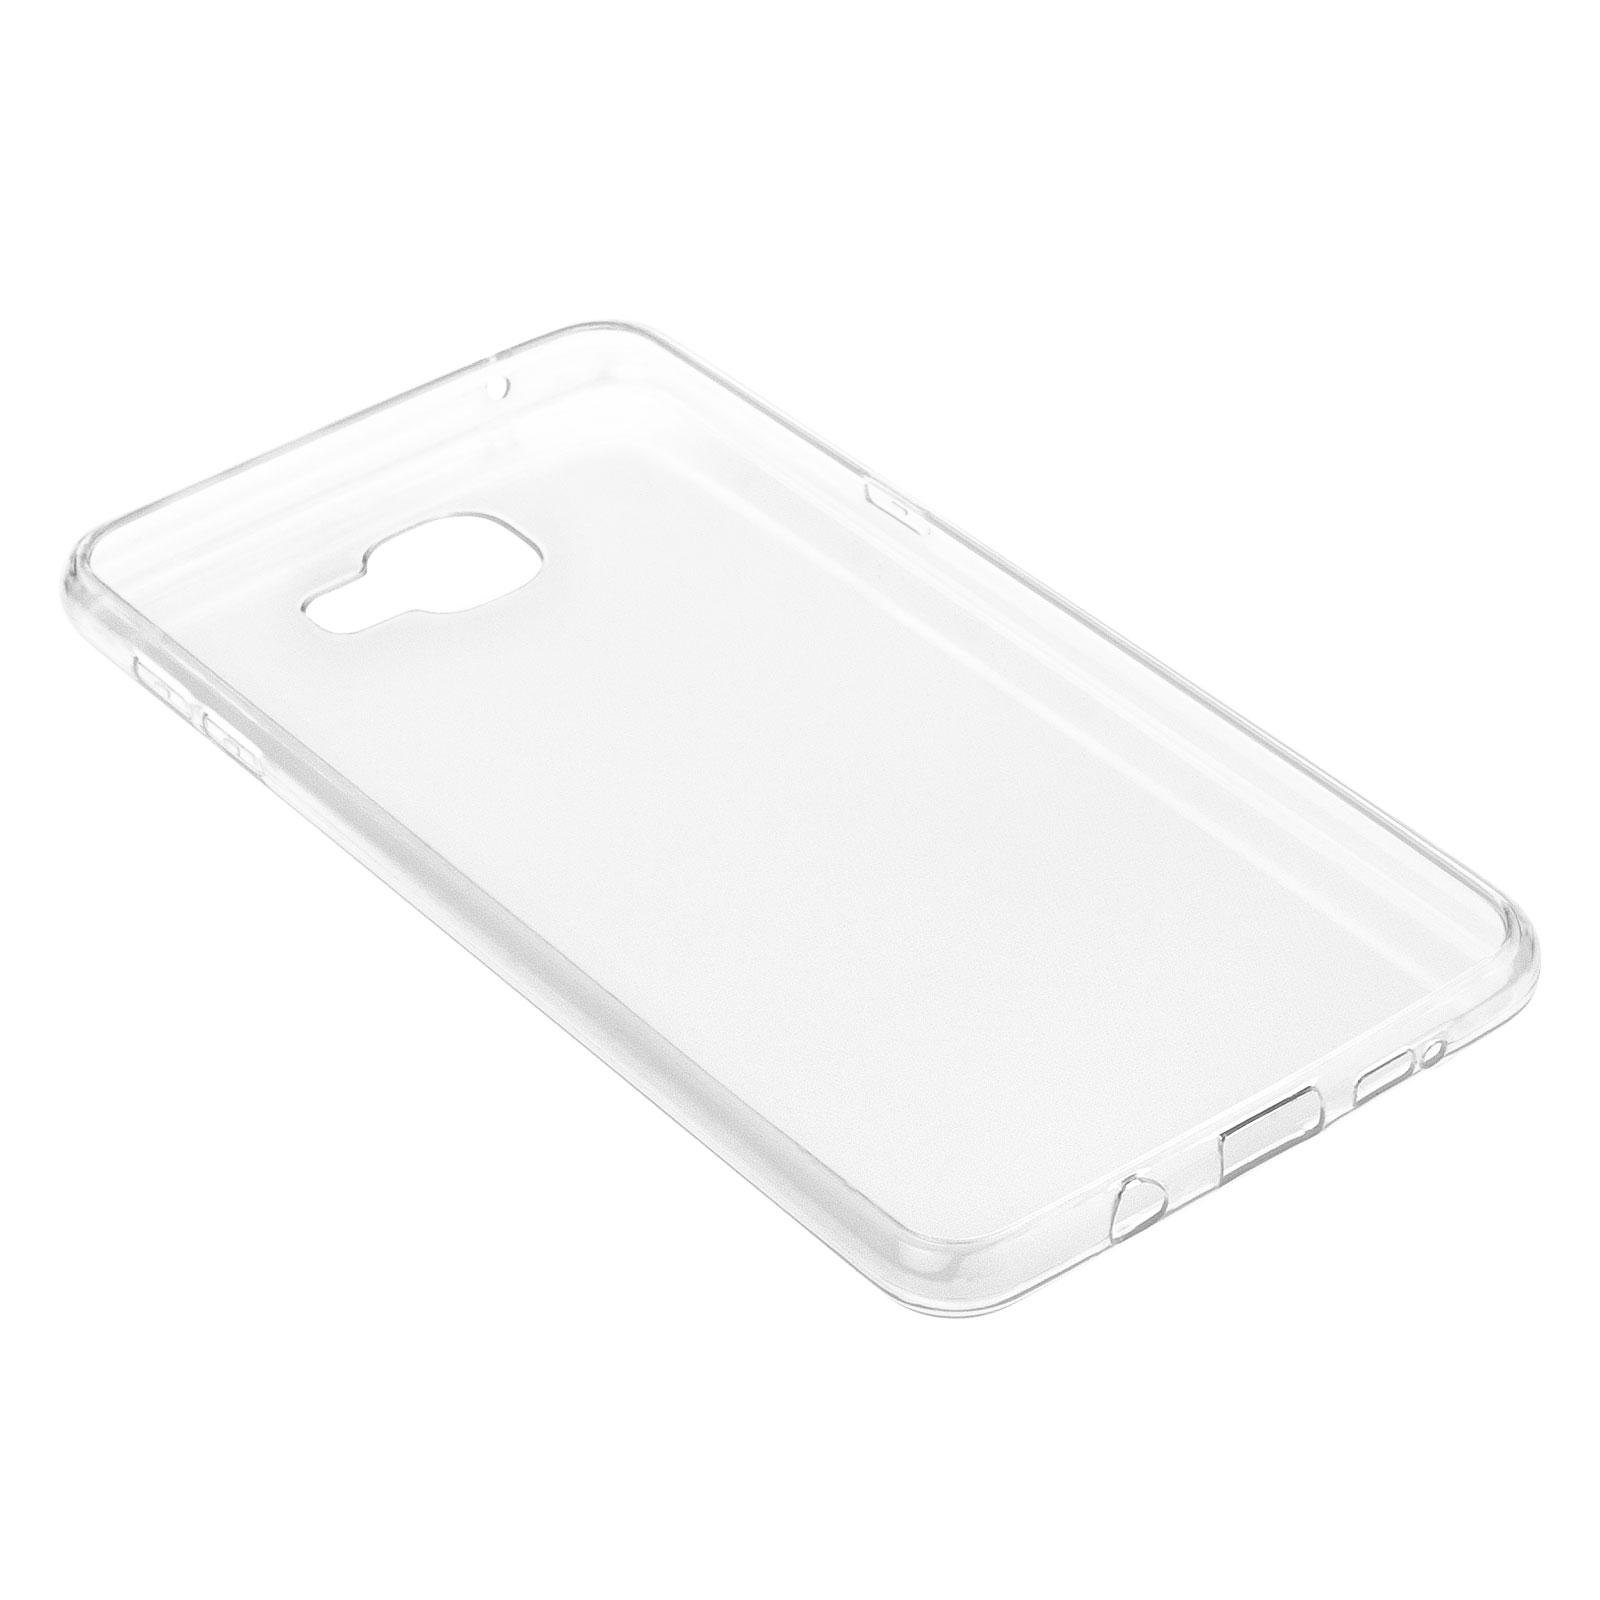 Yousave Accessories Samsung Galaxy A9 Ultra Thin Clear Gel Case